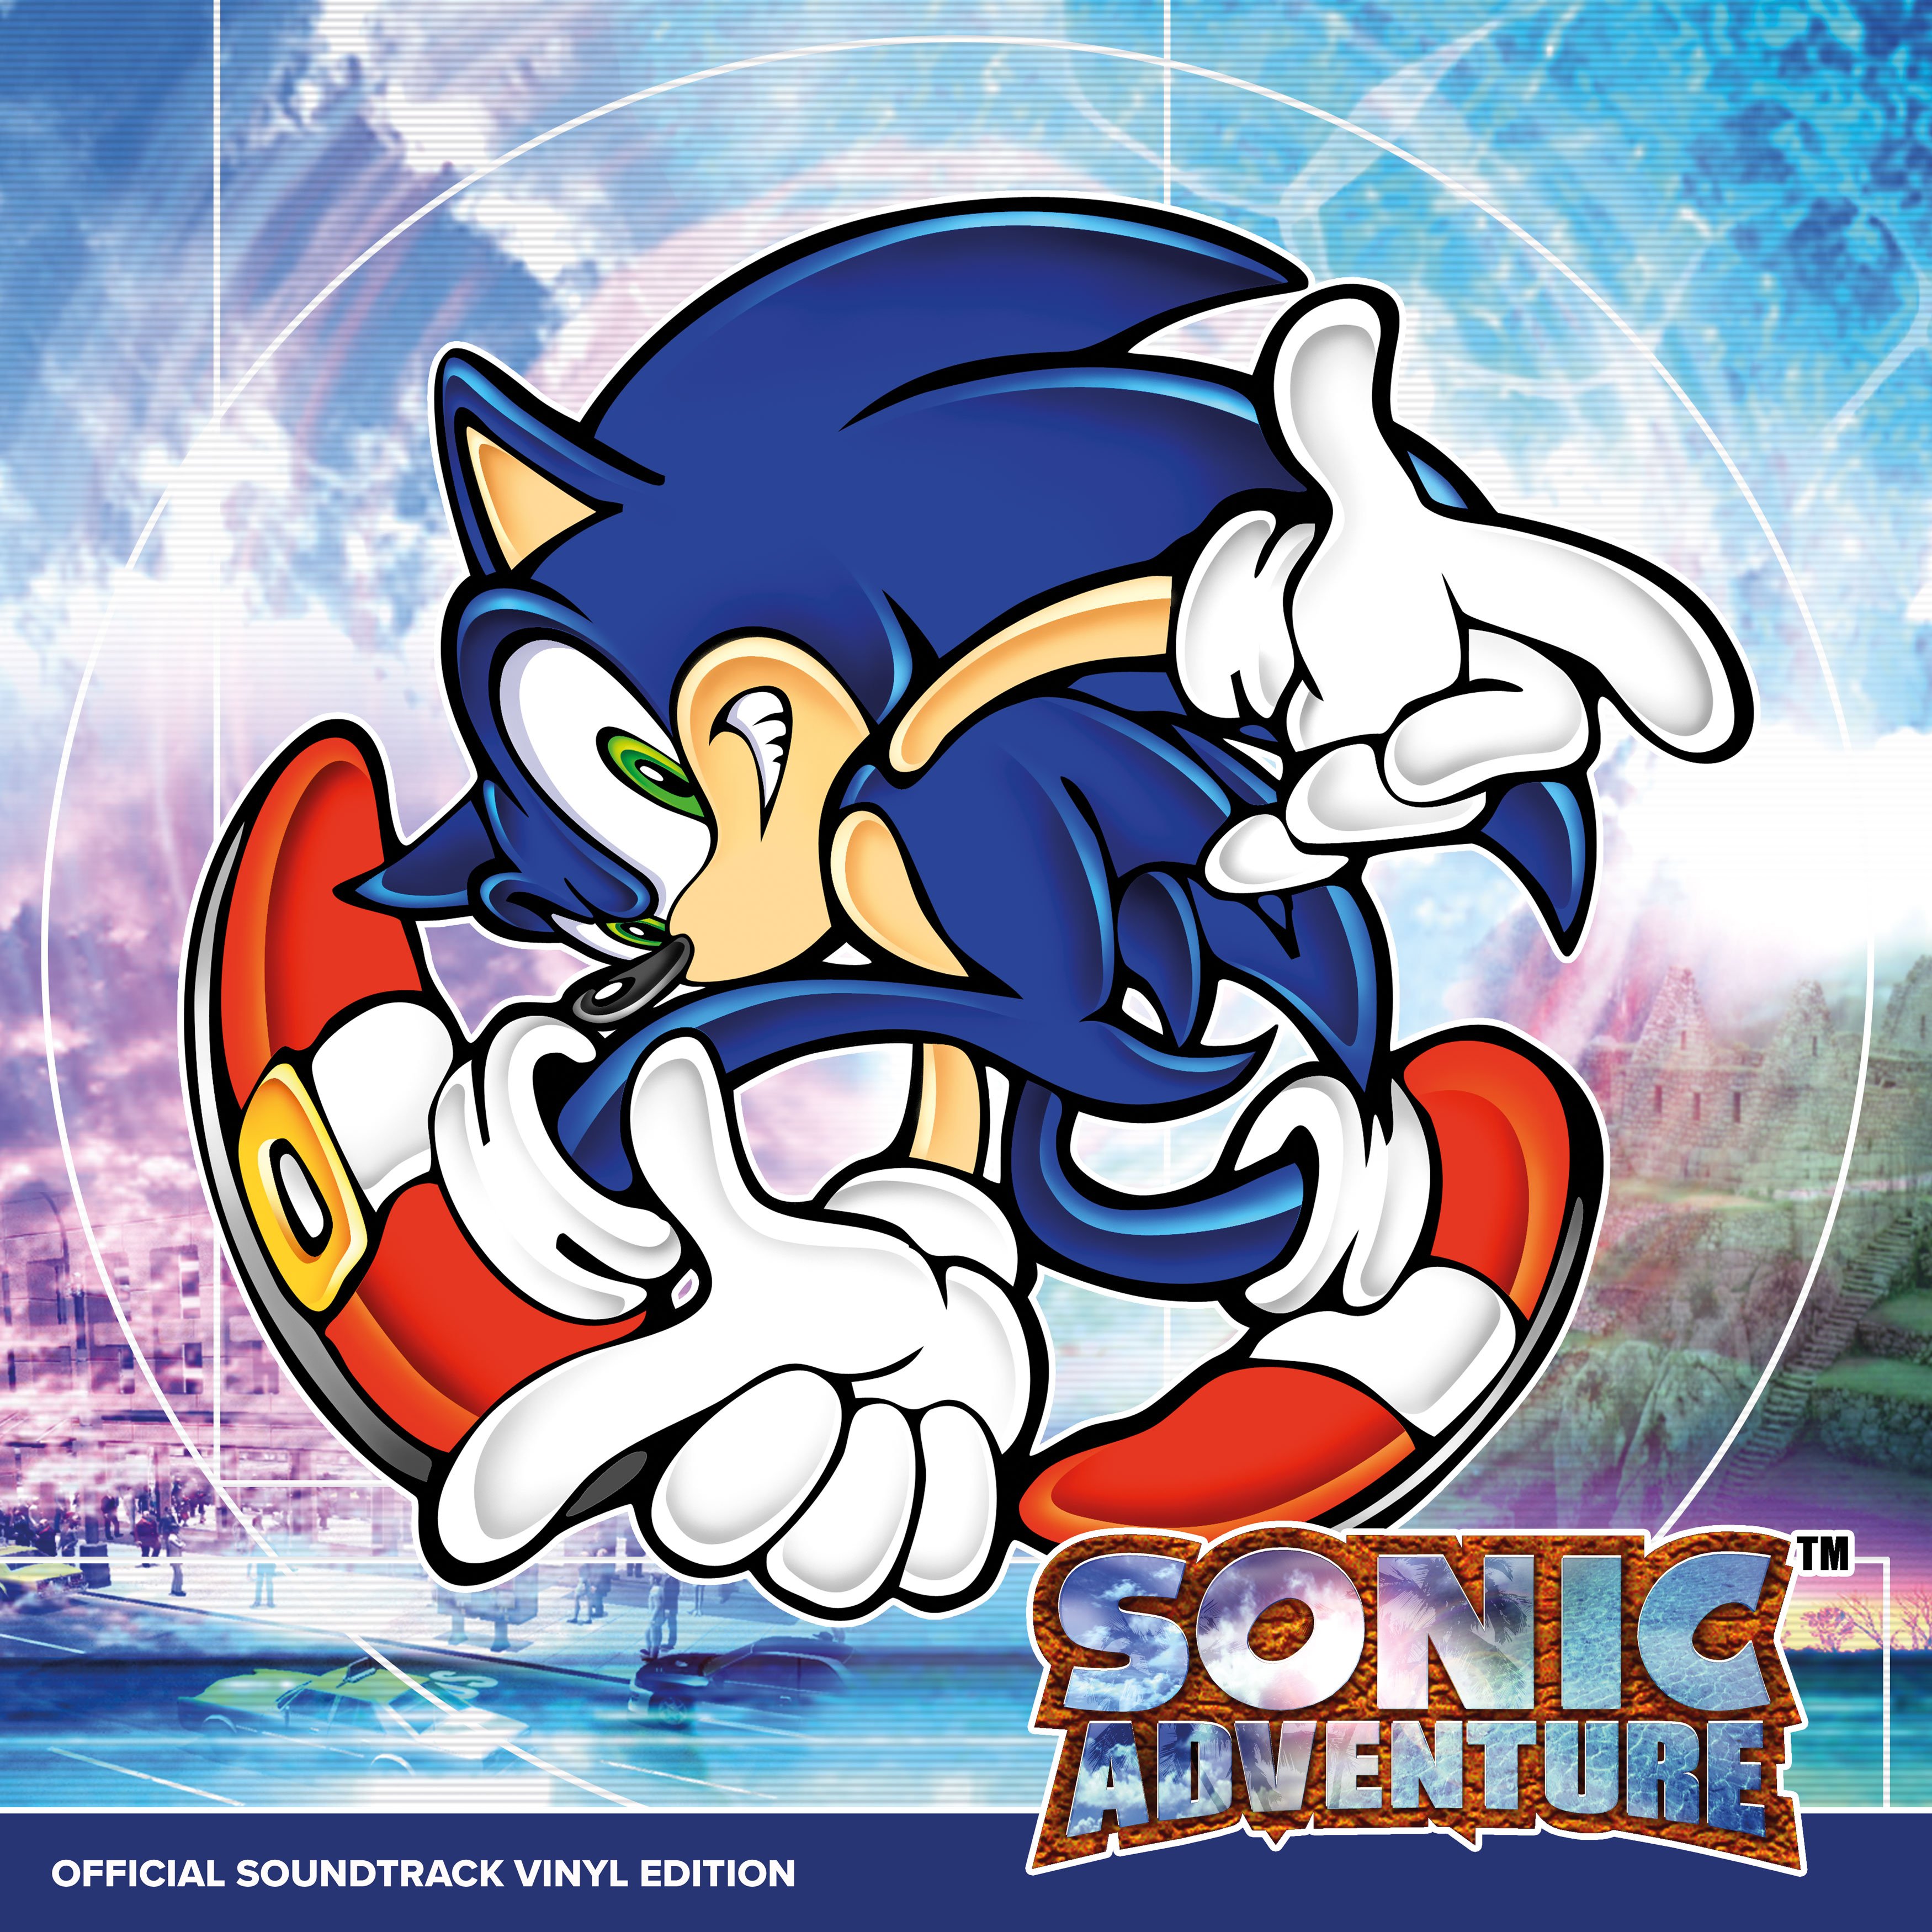 Sonic the Hedgehog News, Media, & Updates on X: Sonic Adventure official  character art. #SonicTheHedgehog  / X